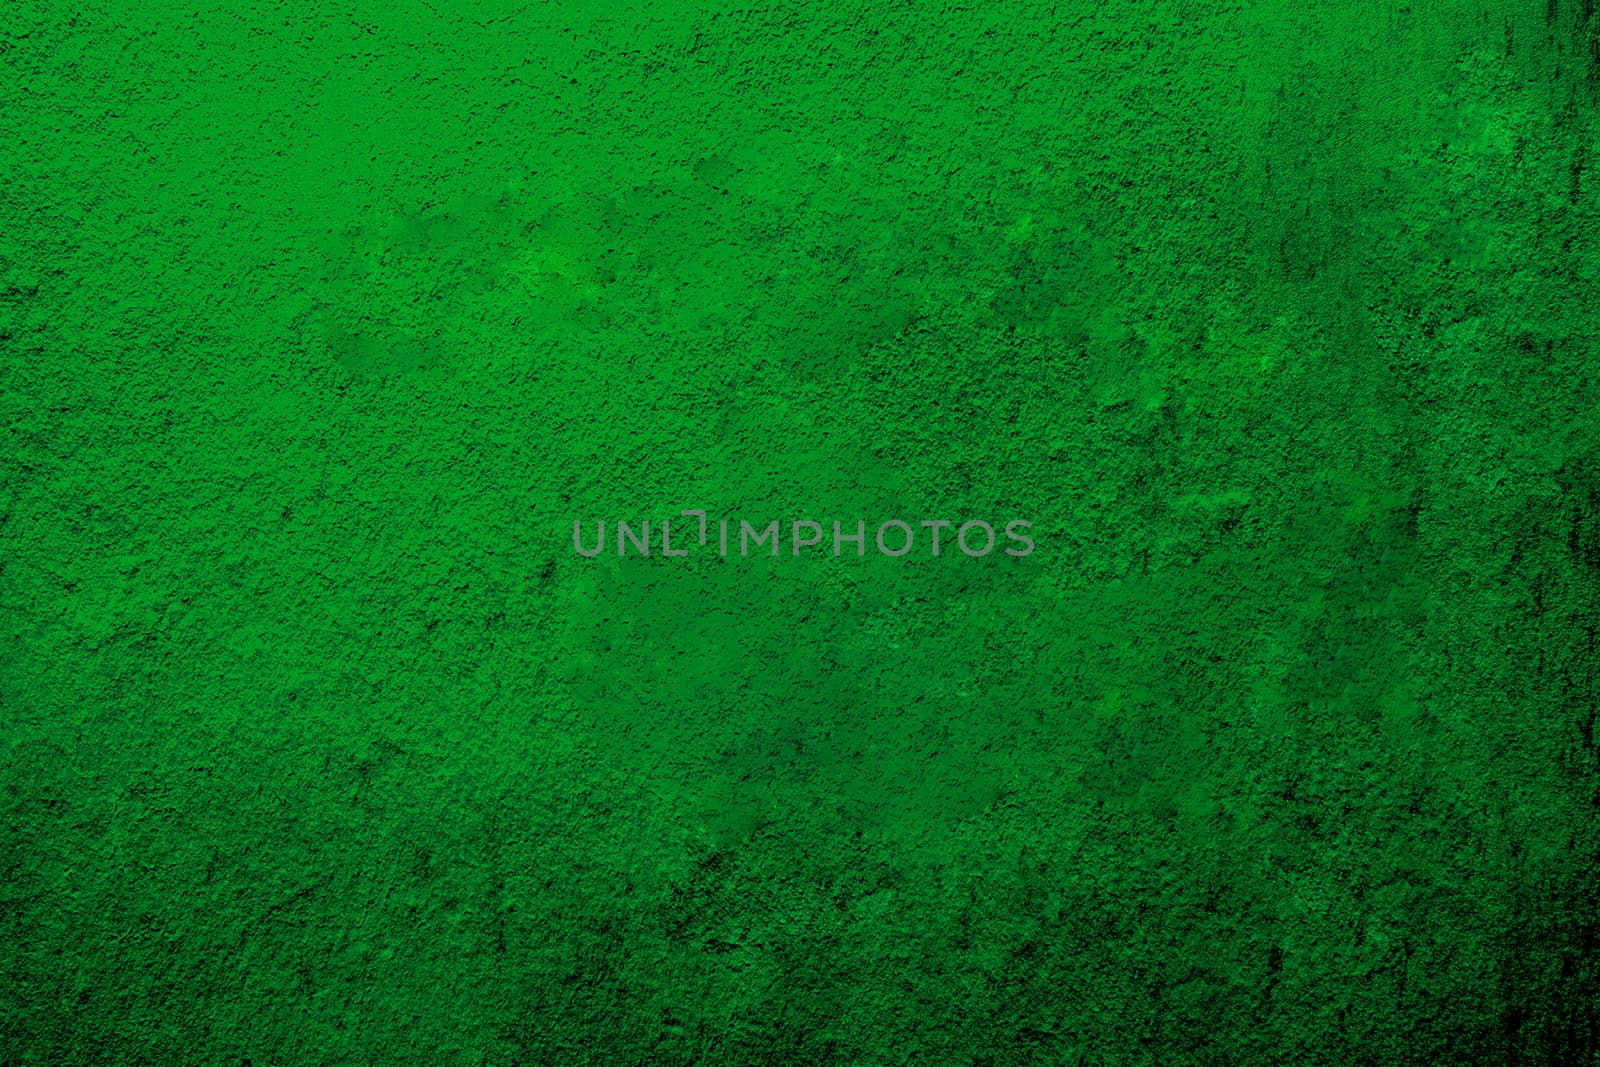 Decorative stucco cement wall, grunge green textured background. abstract banner stylized wallpaper.